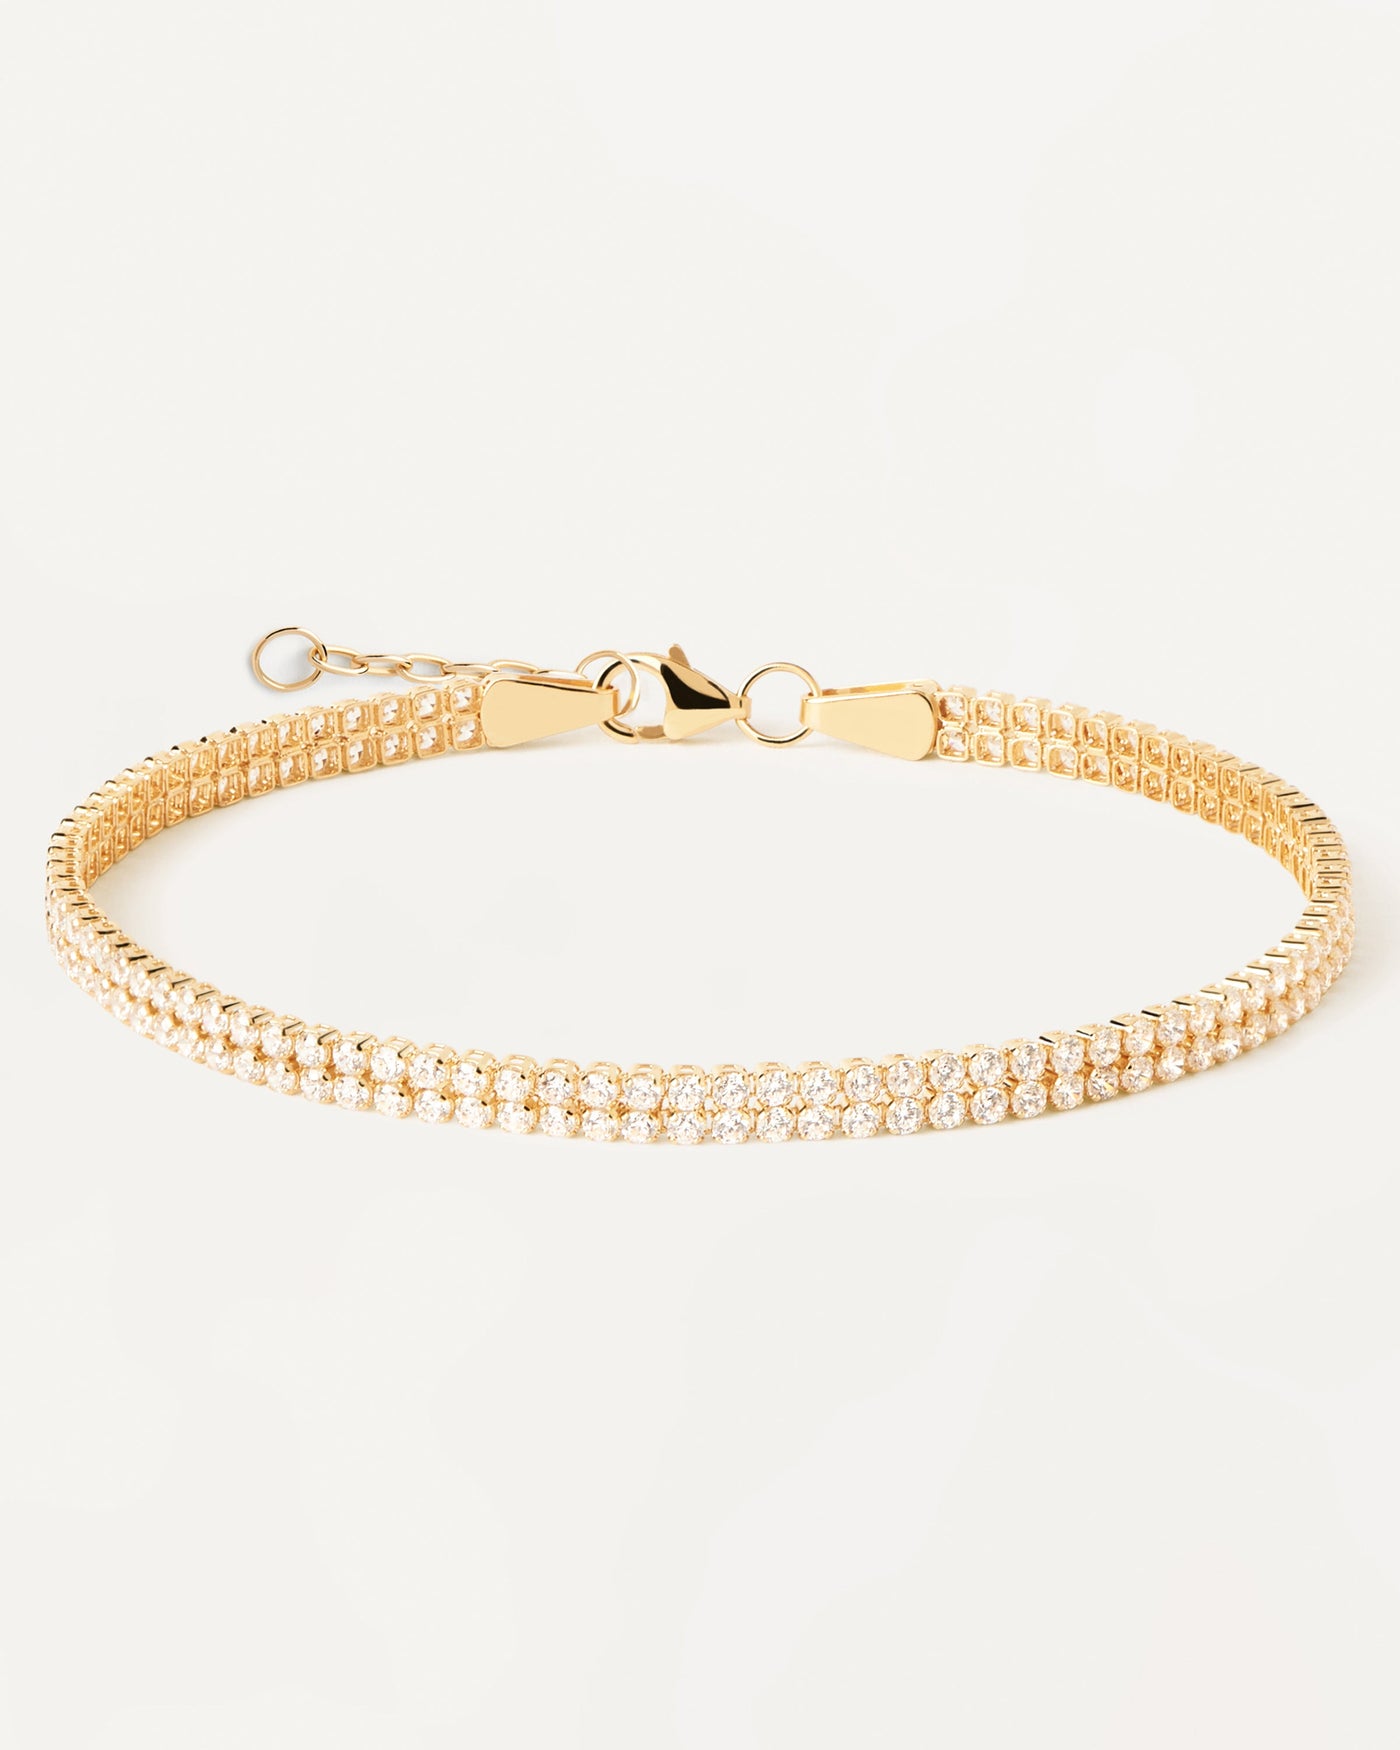 2023 Selection | Diamonds and Gold Double Tennis Bracelet. Yellow gold chain bracelet with double tennis links and lab-grown diamonds. Get the latest arrival from PDPAOLA. Place your order safely and get this Best Seller. Free Shipping.